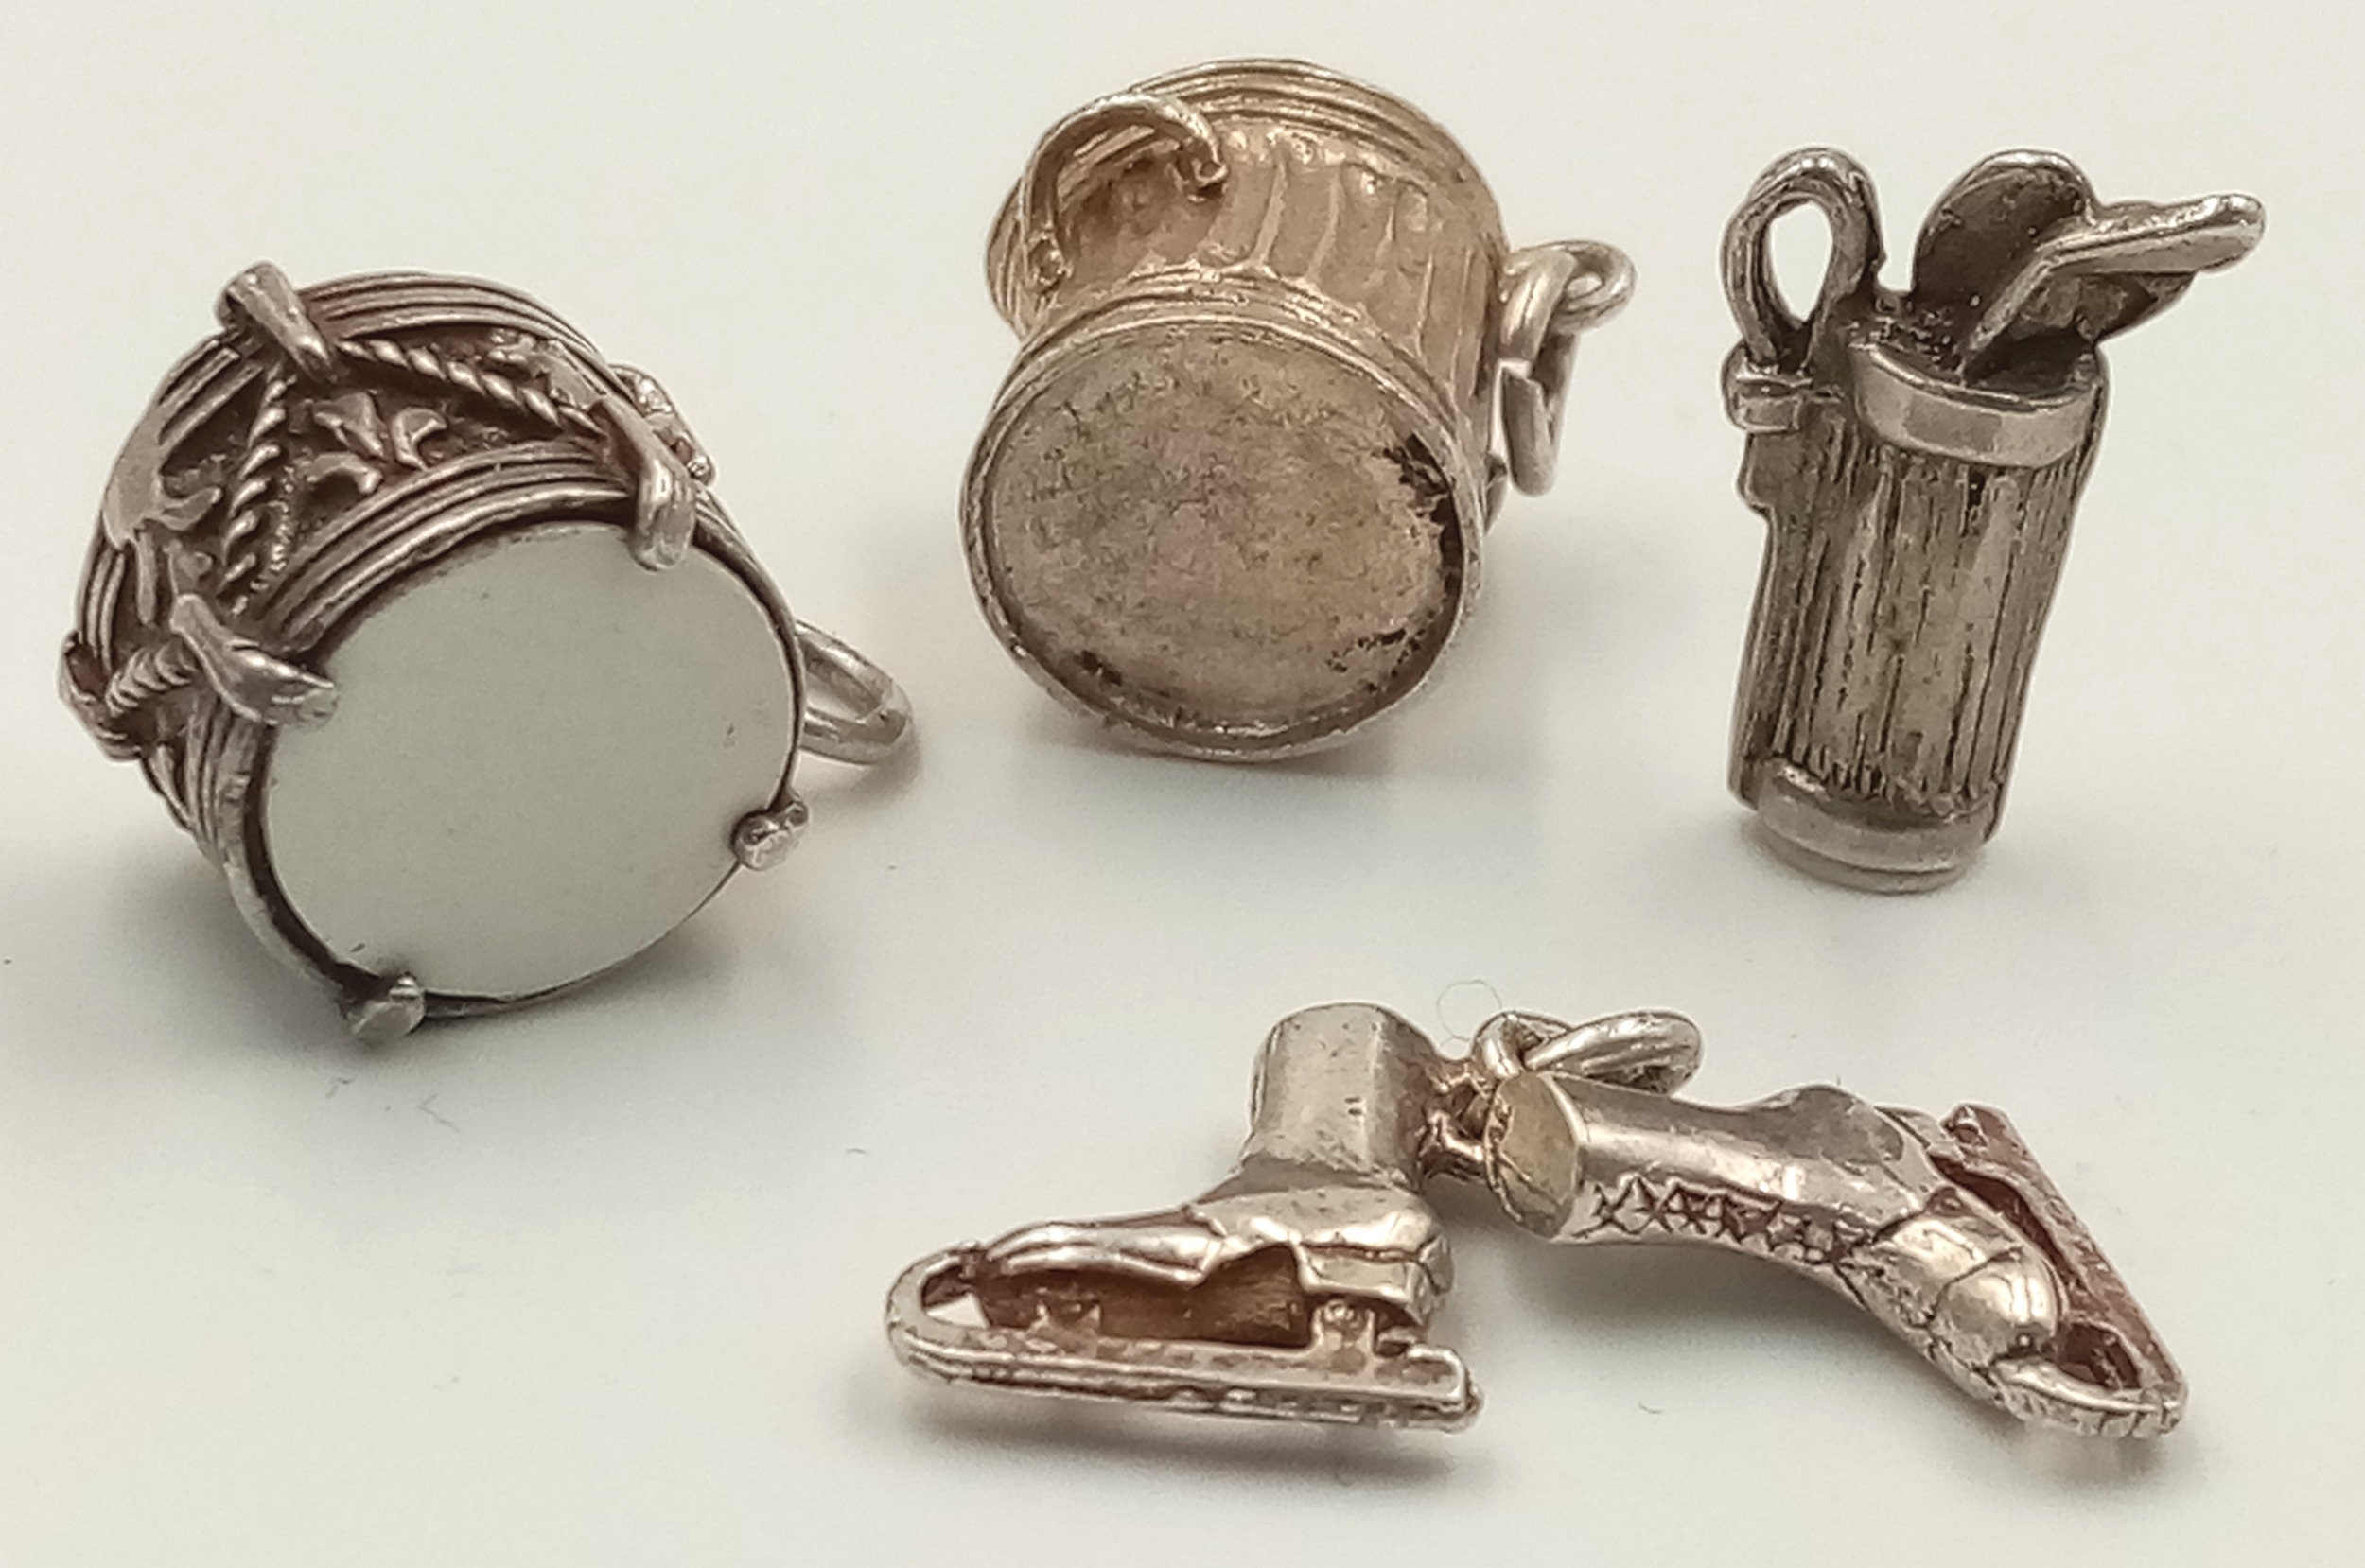 A SELECTION OF 4 X STERLING SILVER CHARMS - DUSTBIN, ICE SKATES, GOLF BAG WITH CLUBS, AND DRUM. 9g